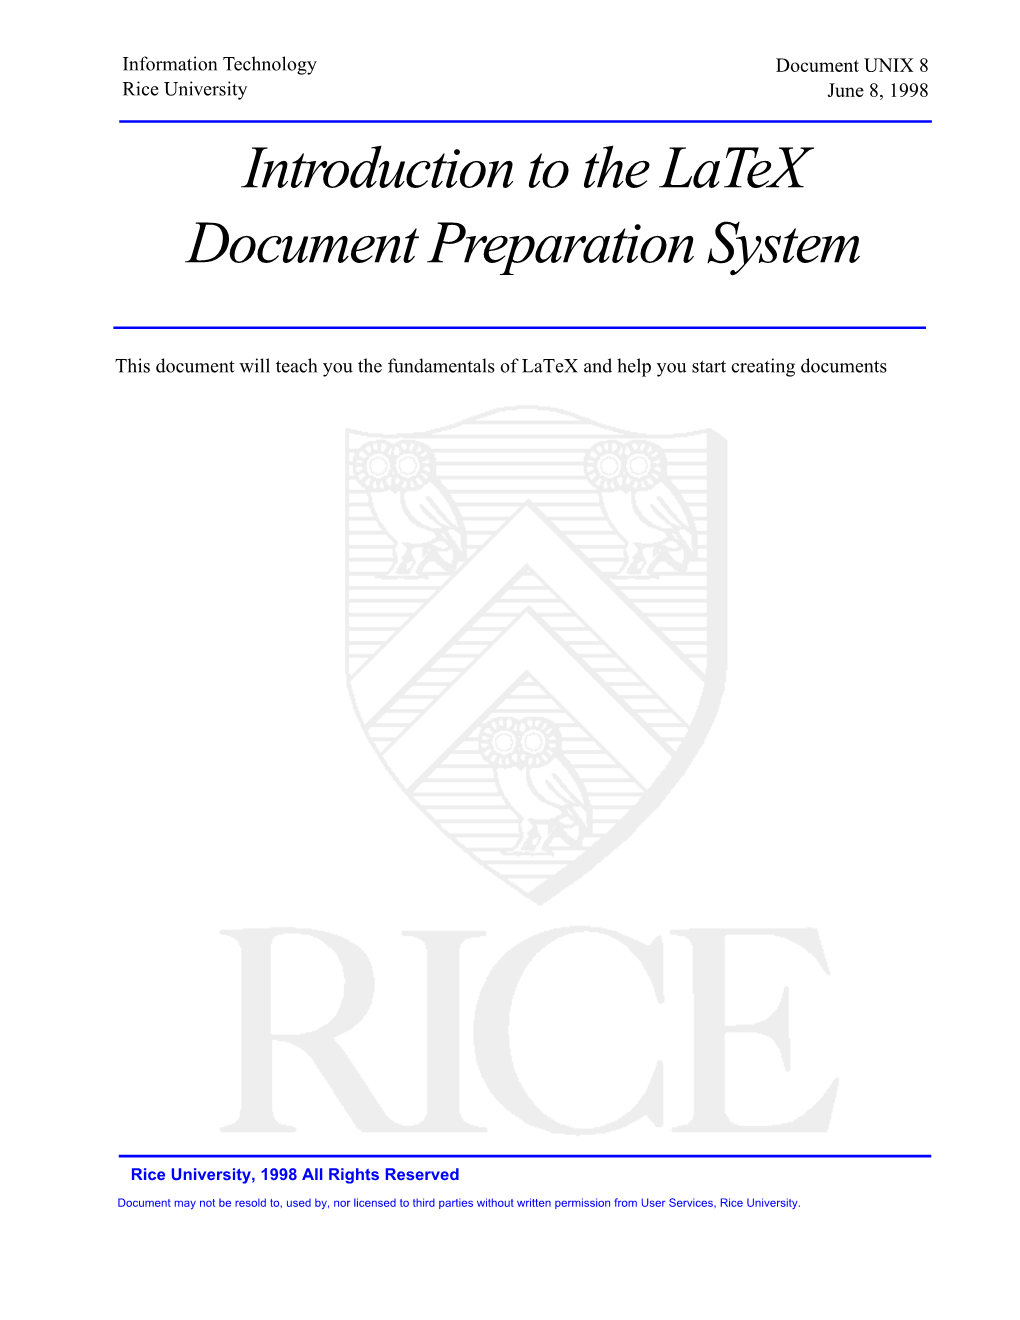 Introduction to the Latex Document Preparation System